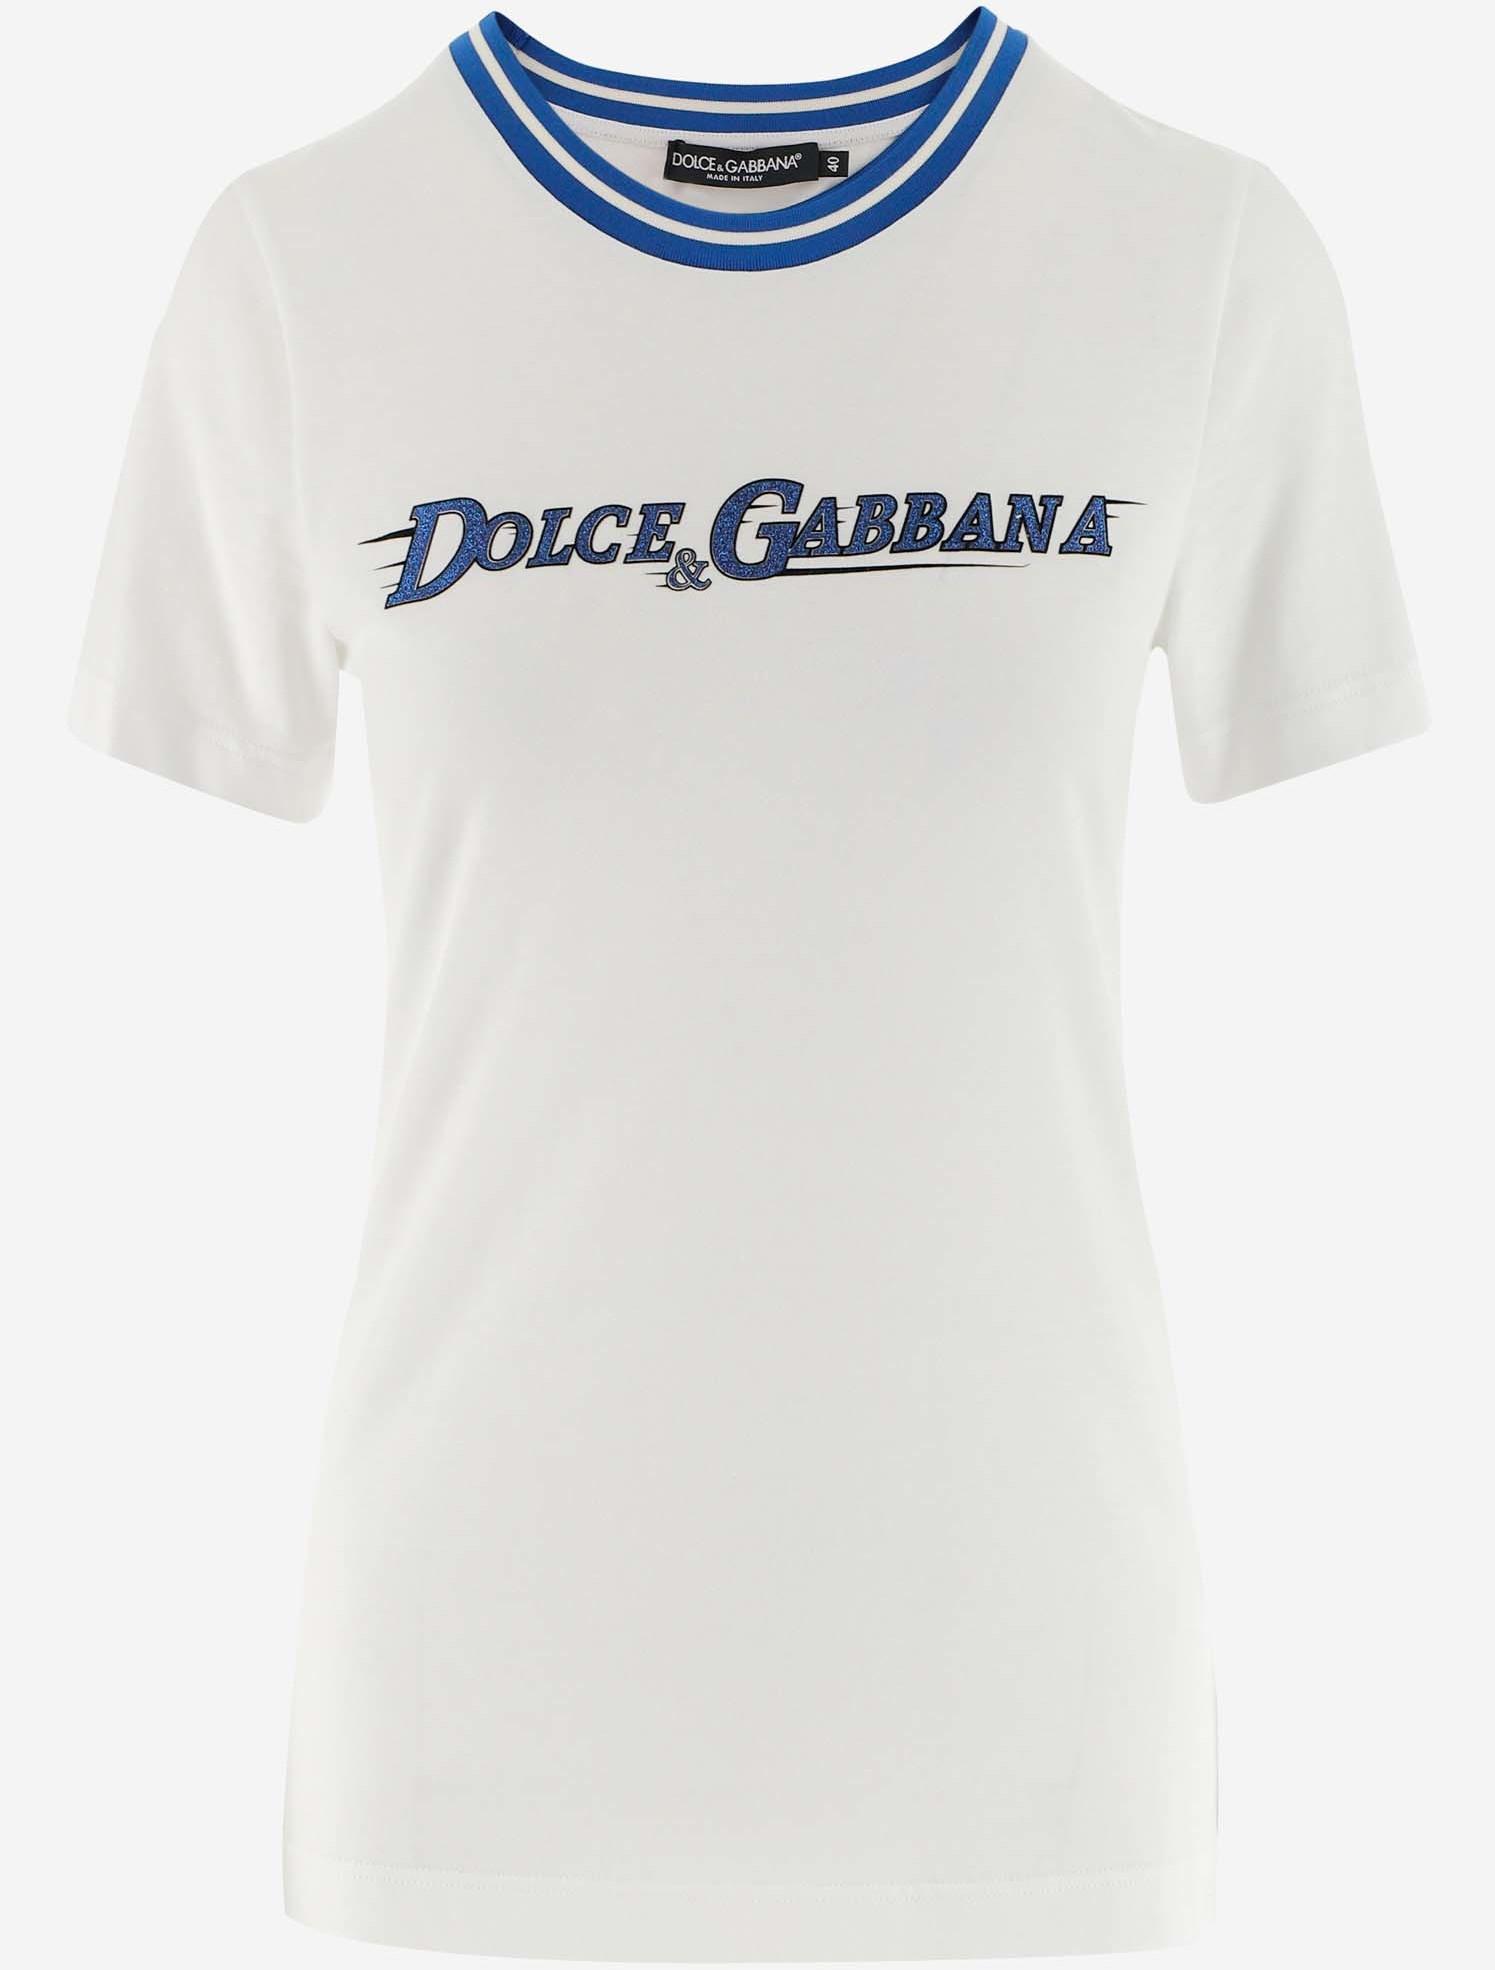 dolce and gabbana tops womens